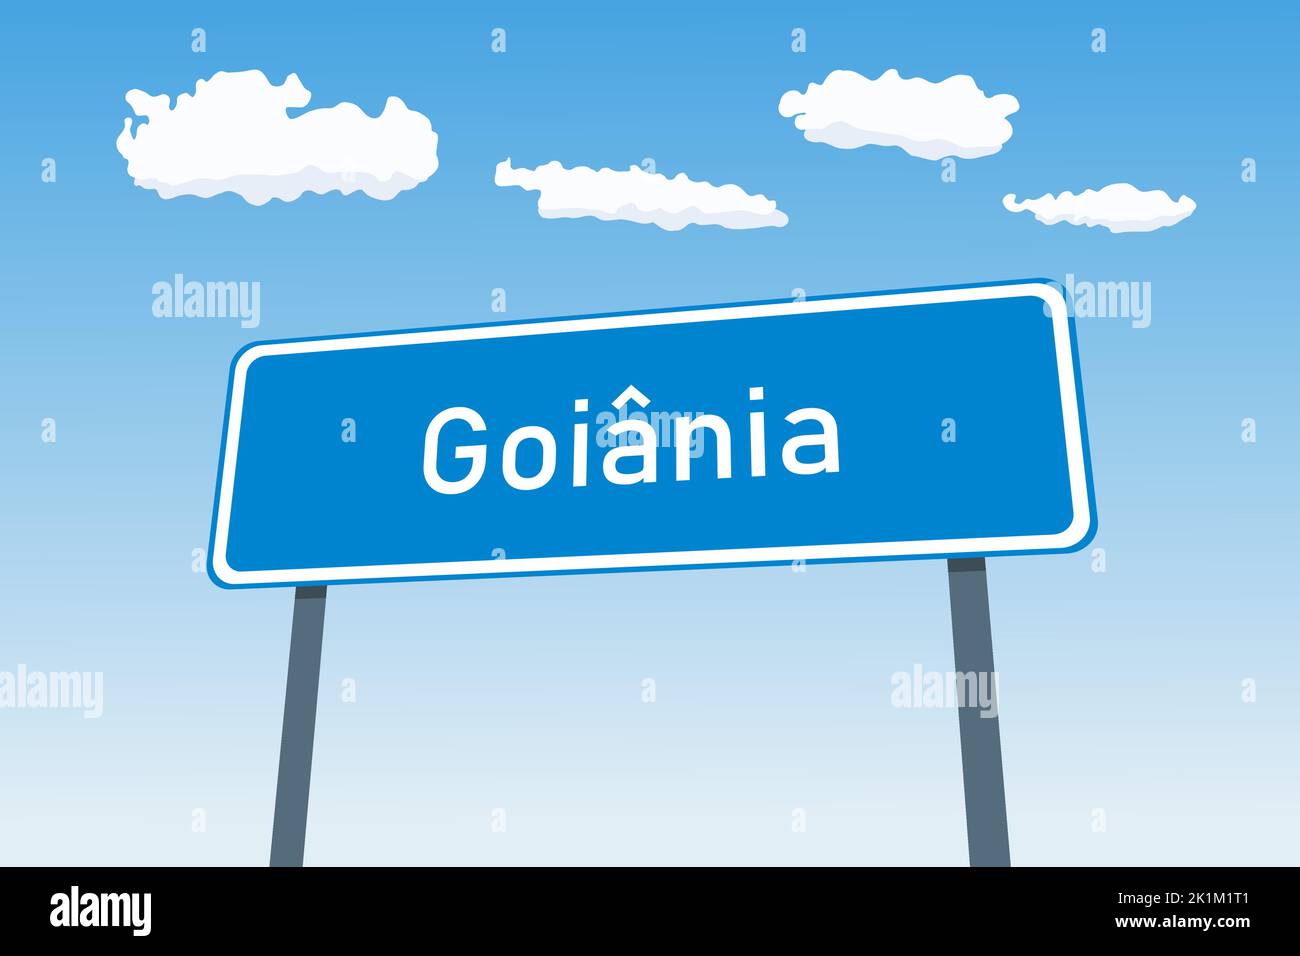 Goiania city sign in Brazil. City limit welcome road sign. Stock Vector